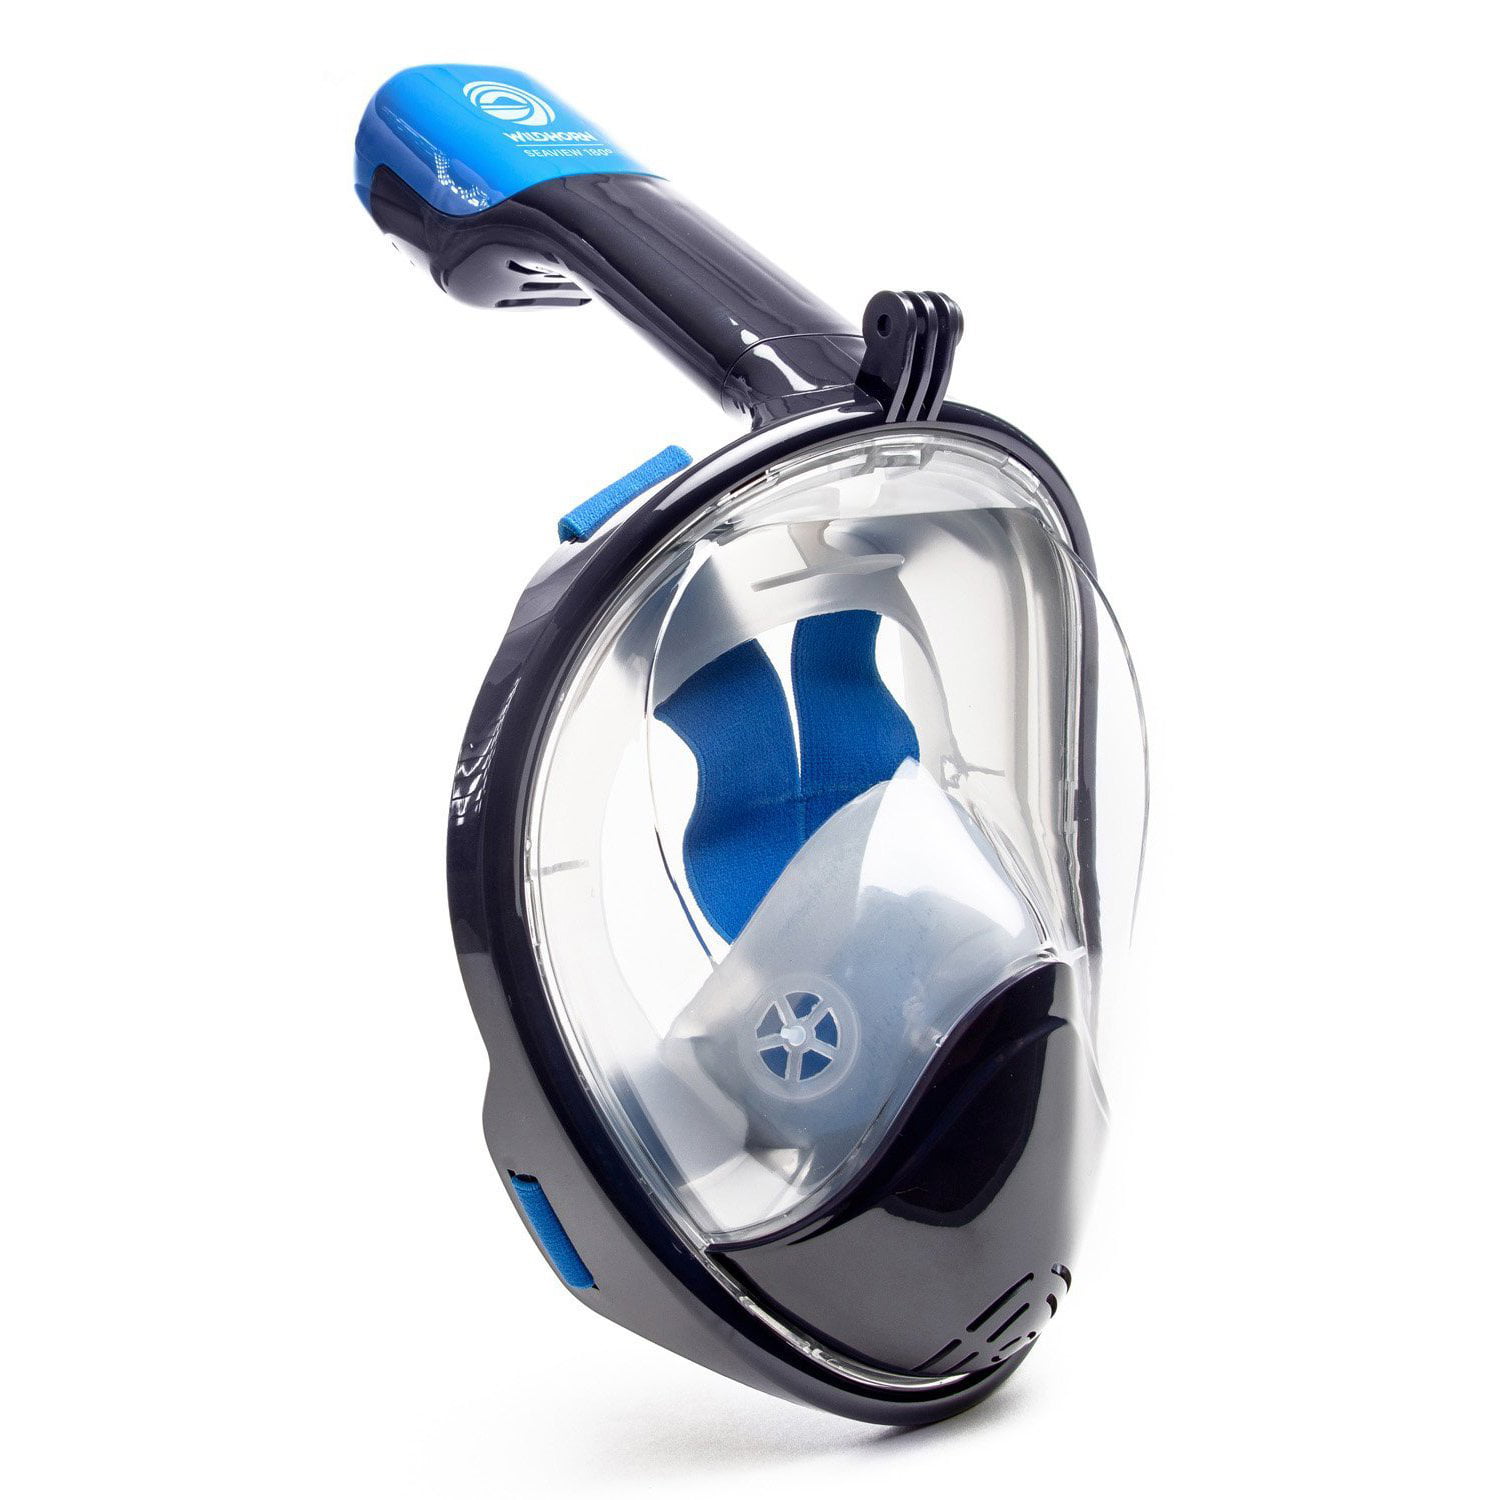 Seaview 180° Full Face Snorkel Mask Scuba Diving Snorkeling Set For GoPro Dry US 